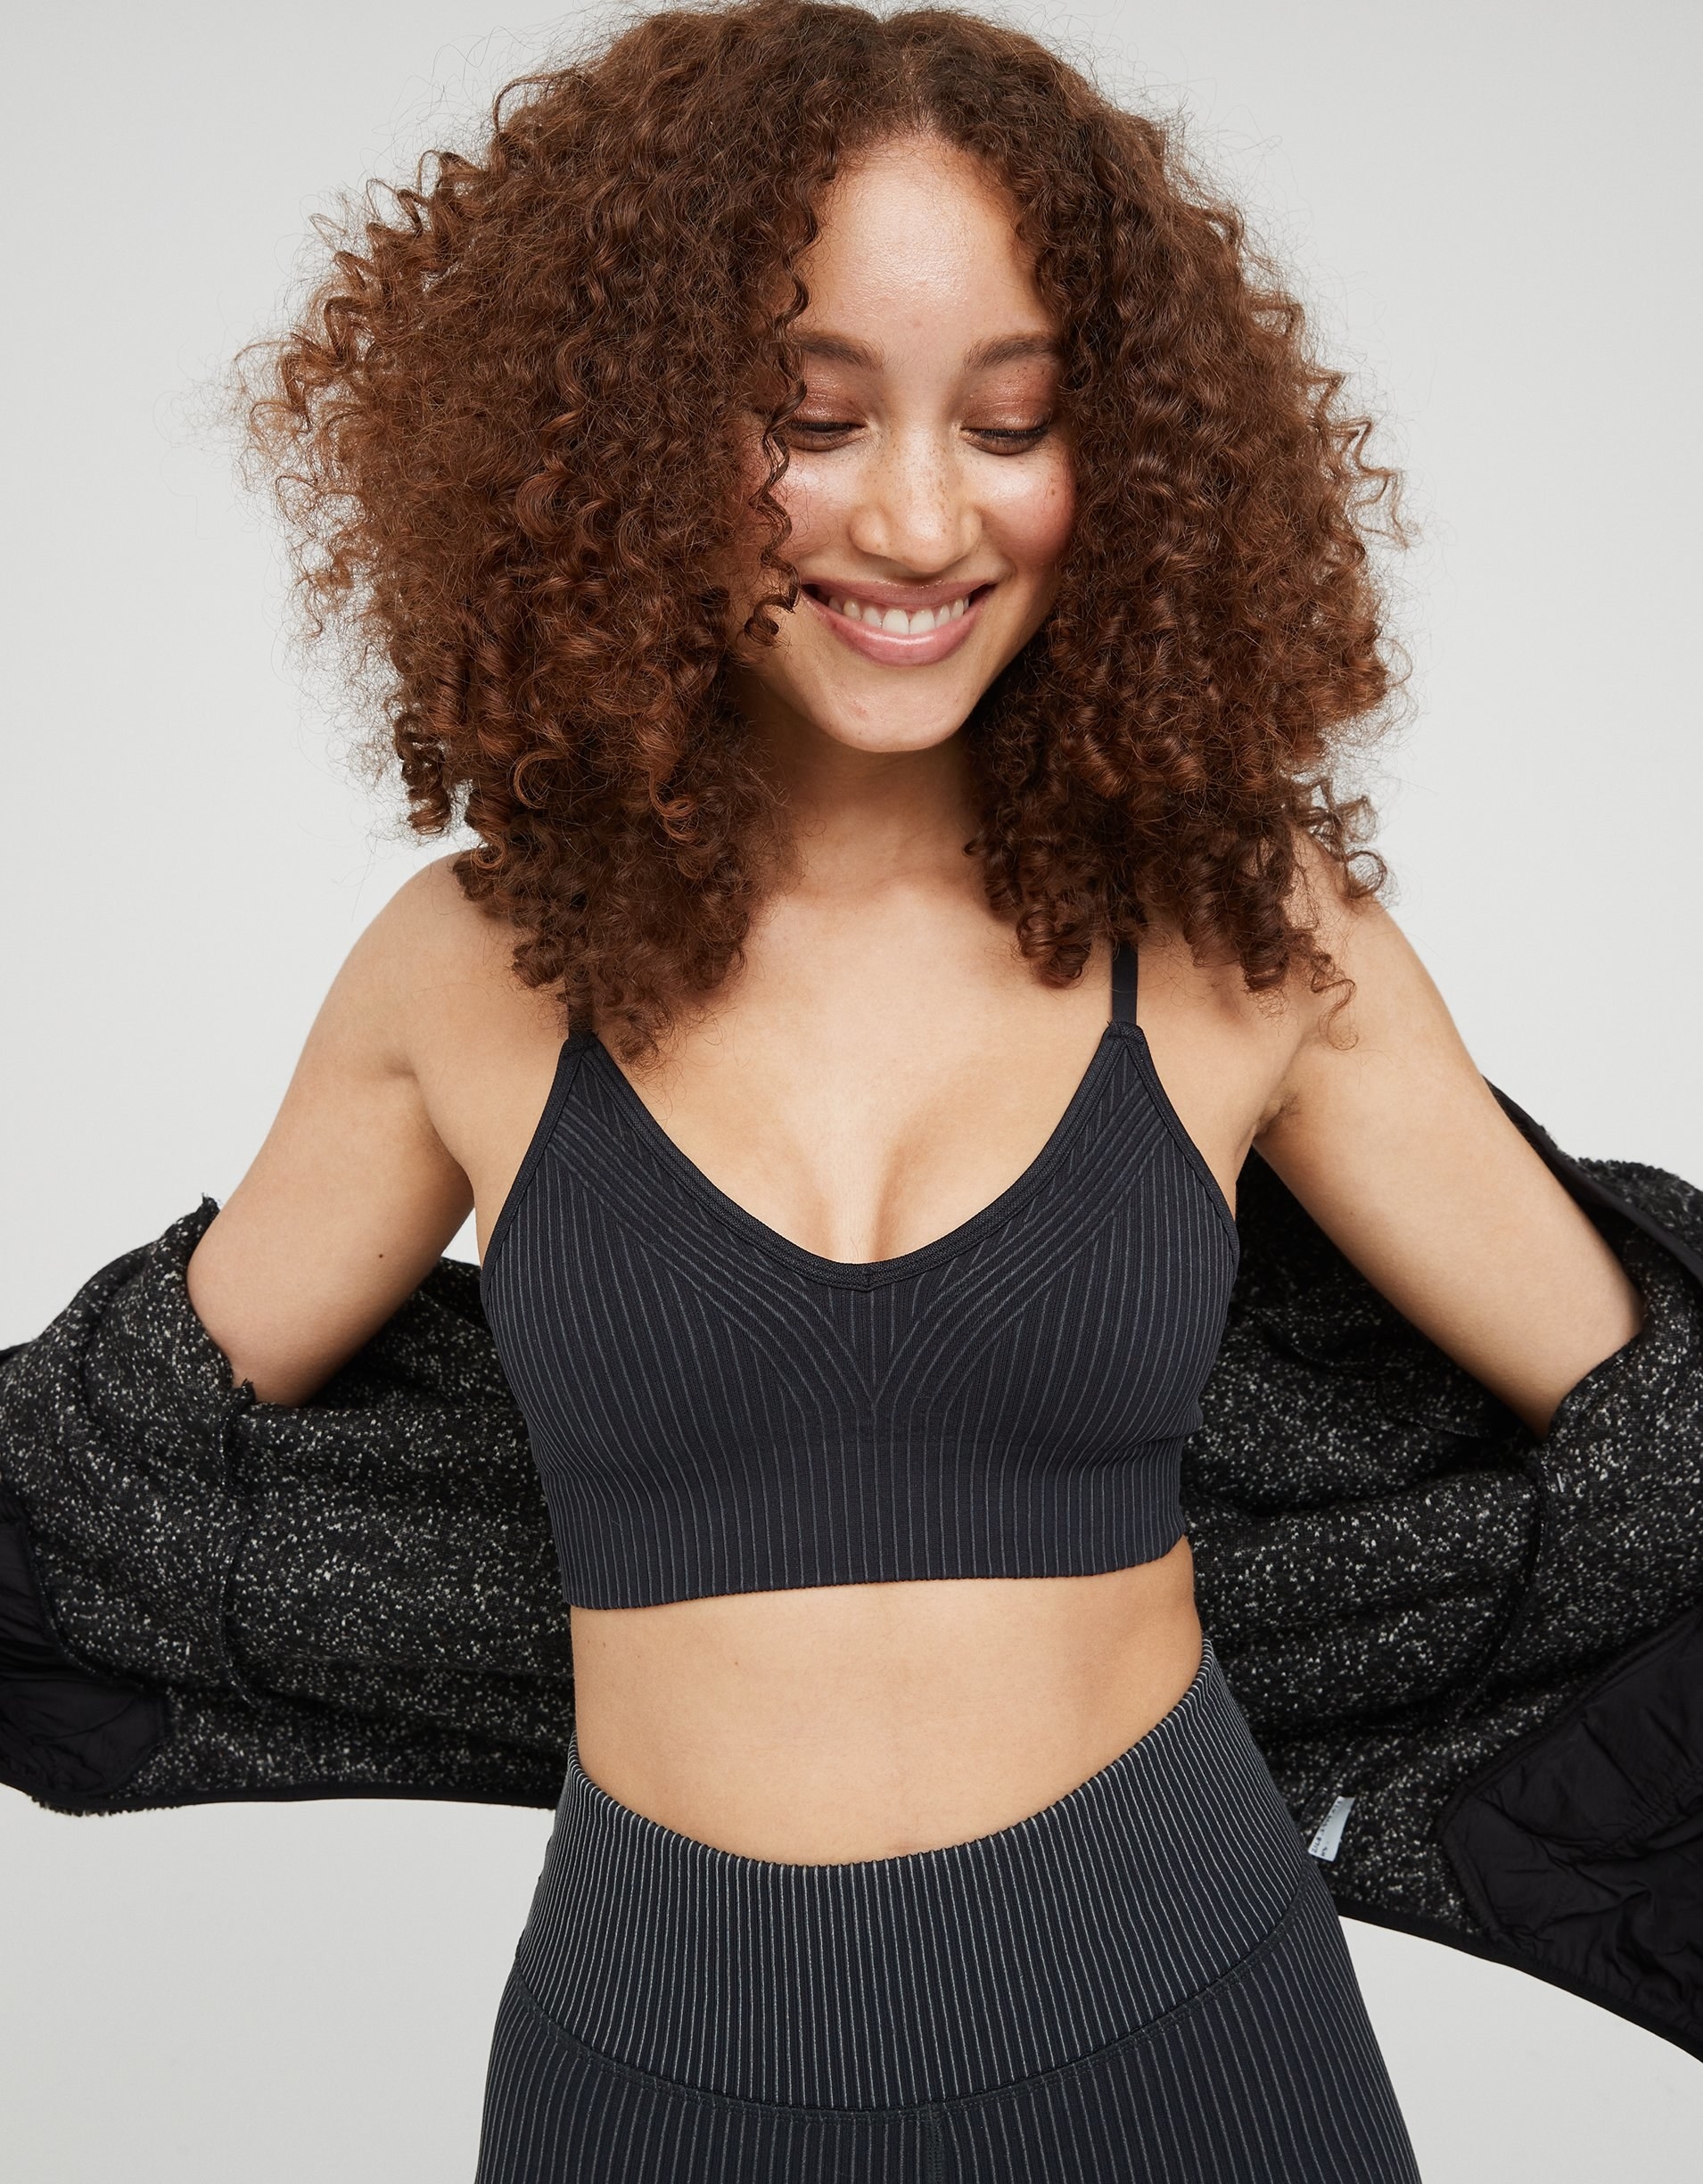 model wearing the thin-strapped sports bra in black